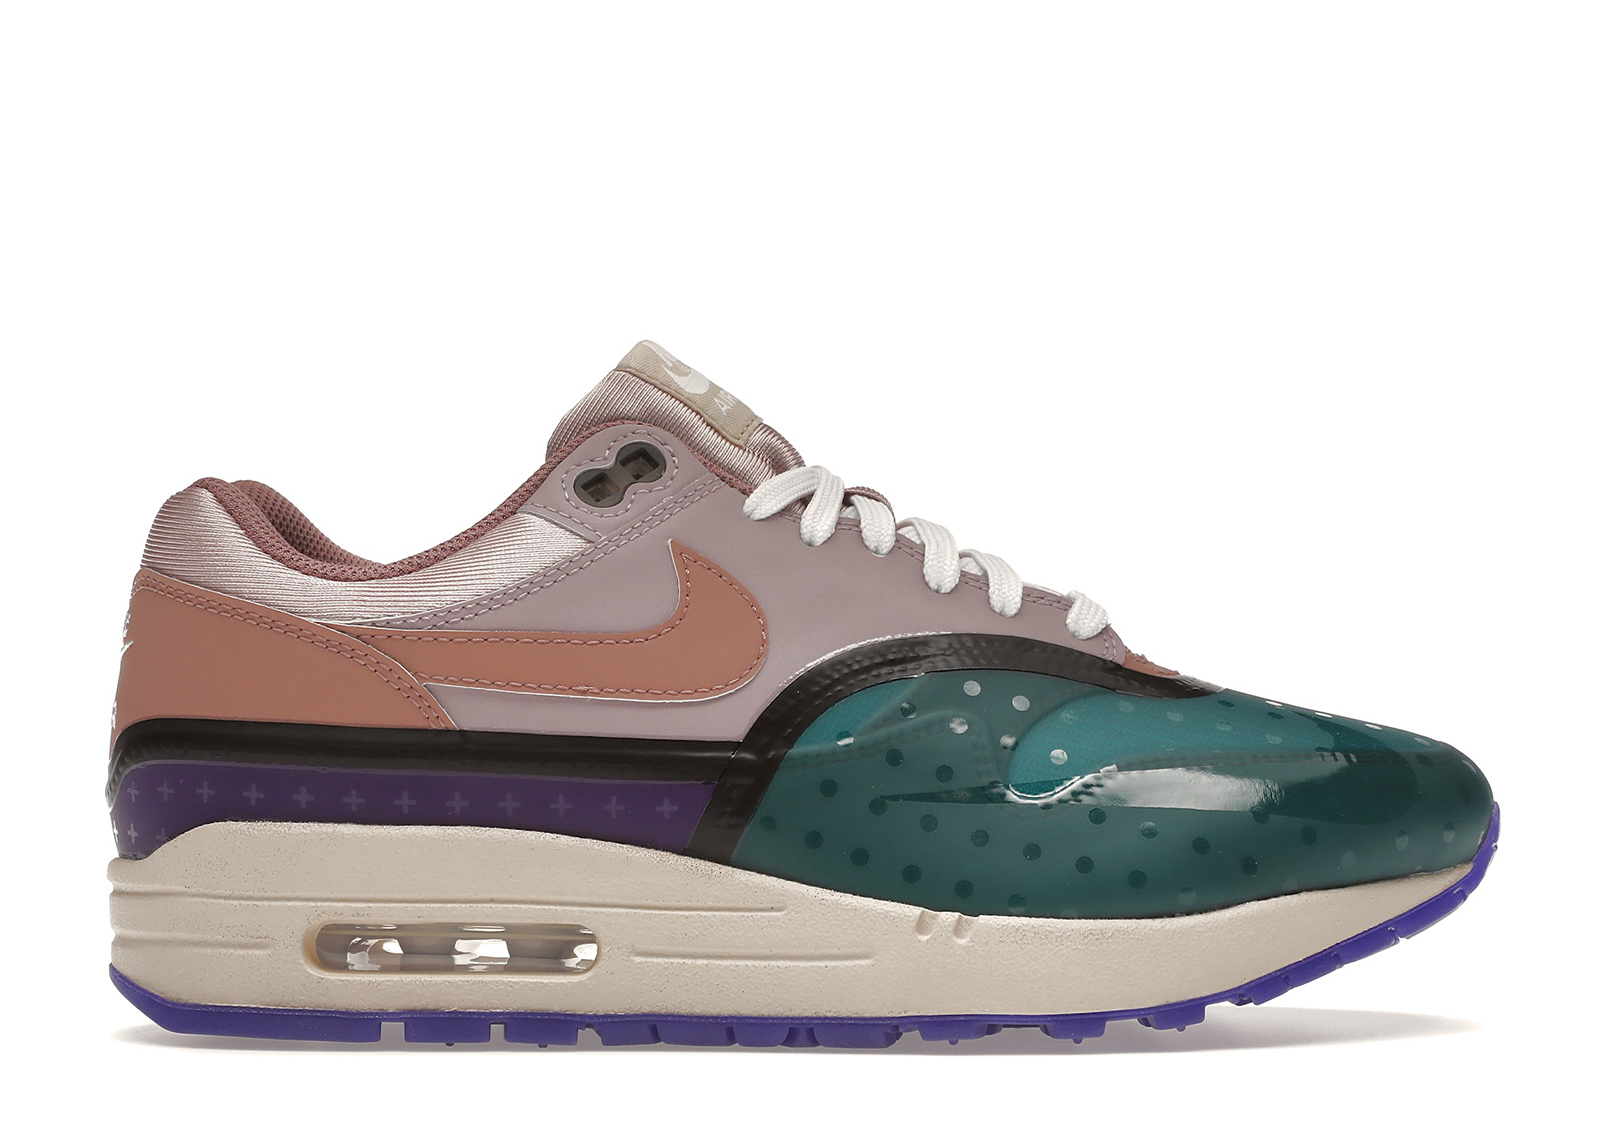 Buy Nike Air Max 1 Shoes & New Sneakers - StockX